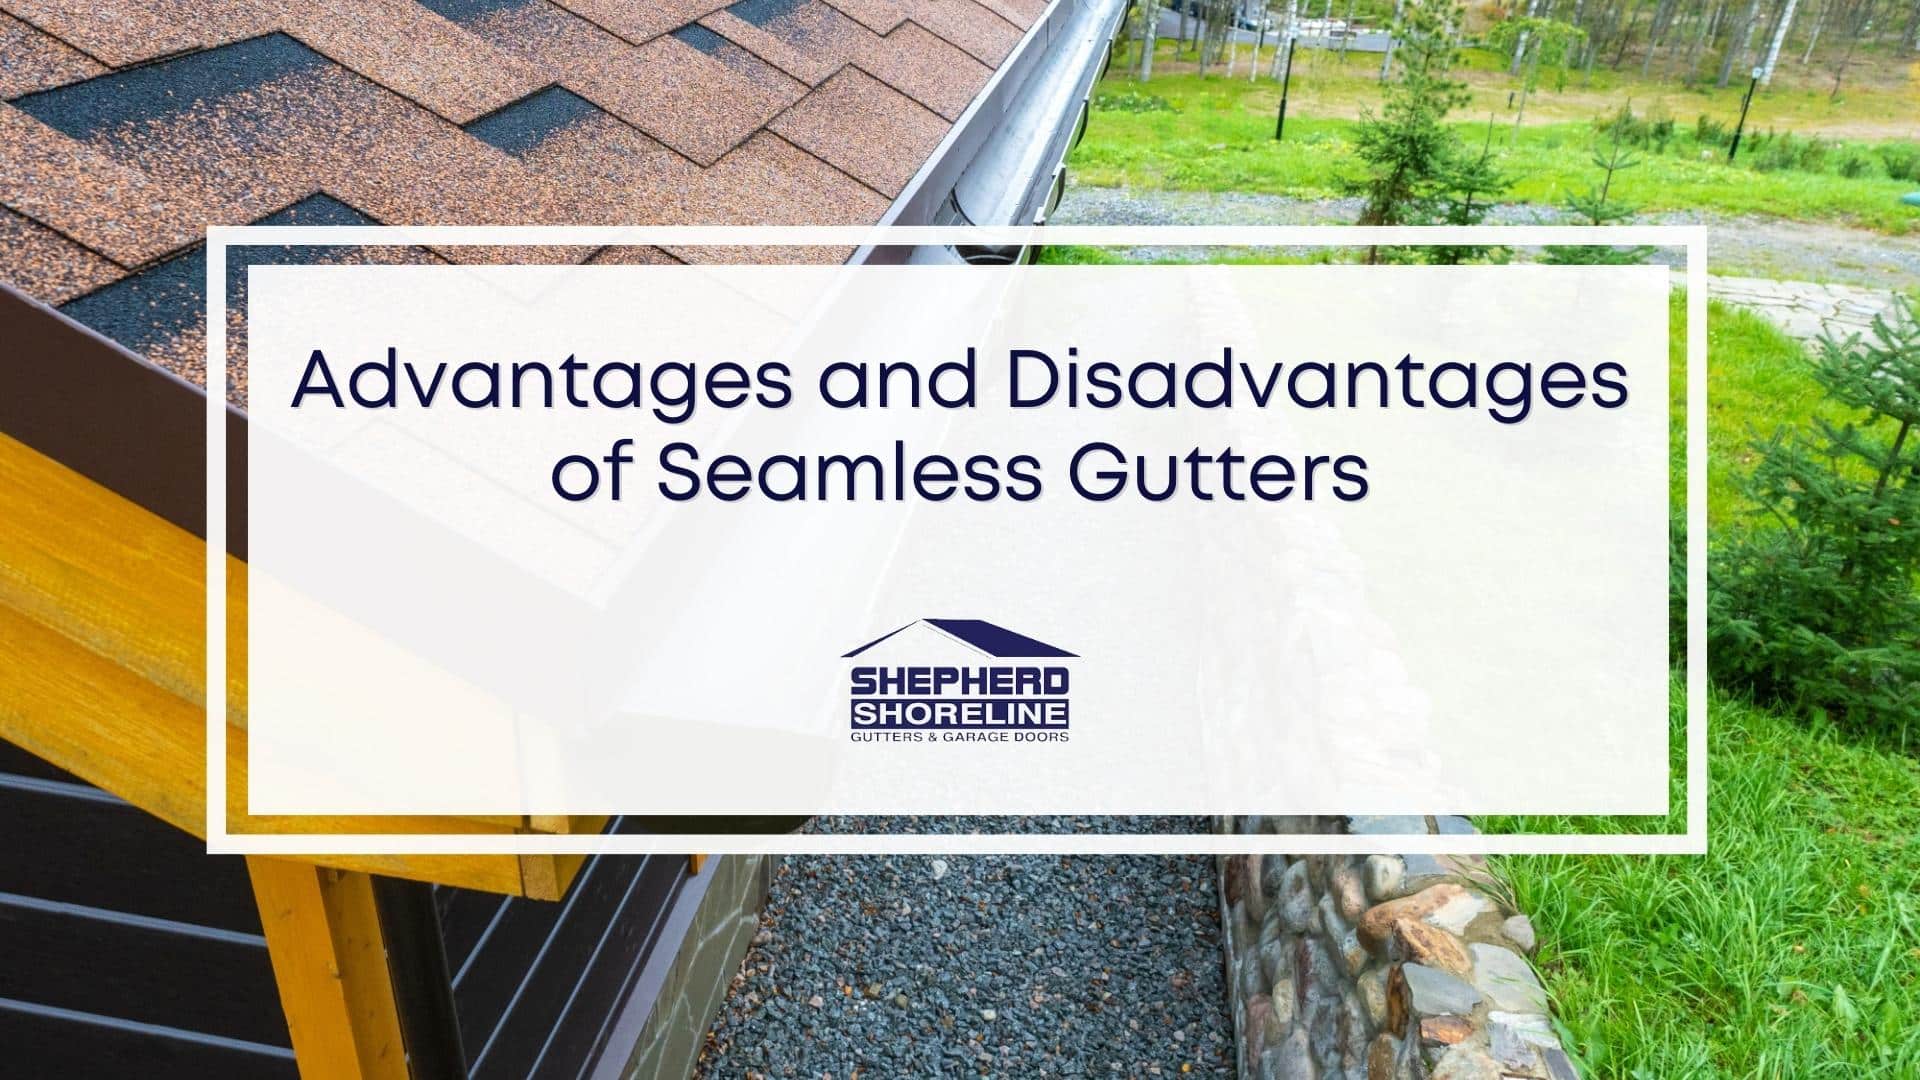 Featured image of advantages and disadvantages of seamless gutters